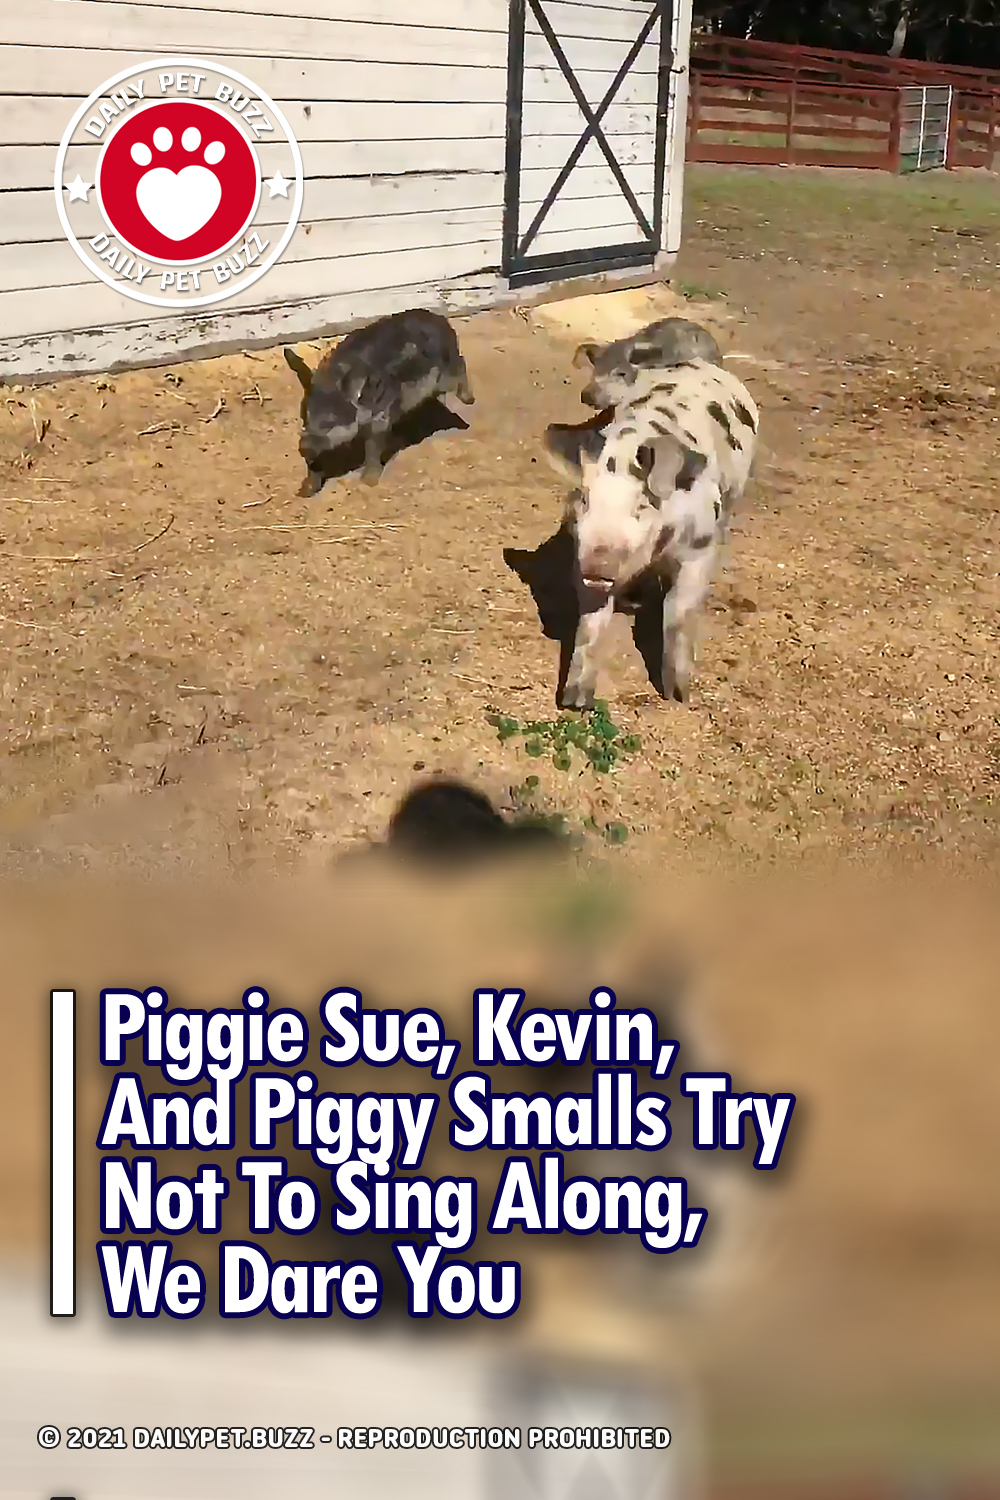 Piggie Sue, Kevin, And Piggy Smalls Try Not To Sing Along, We Dare You